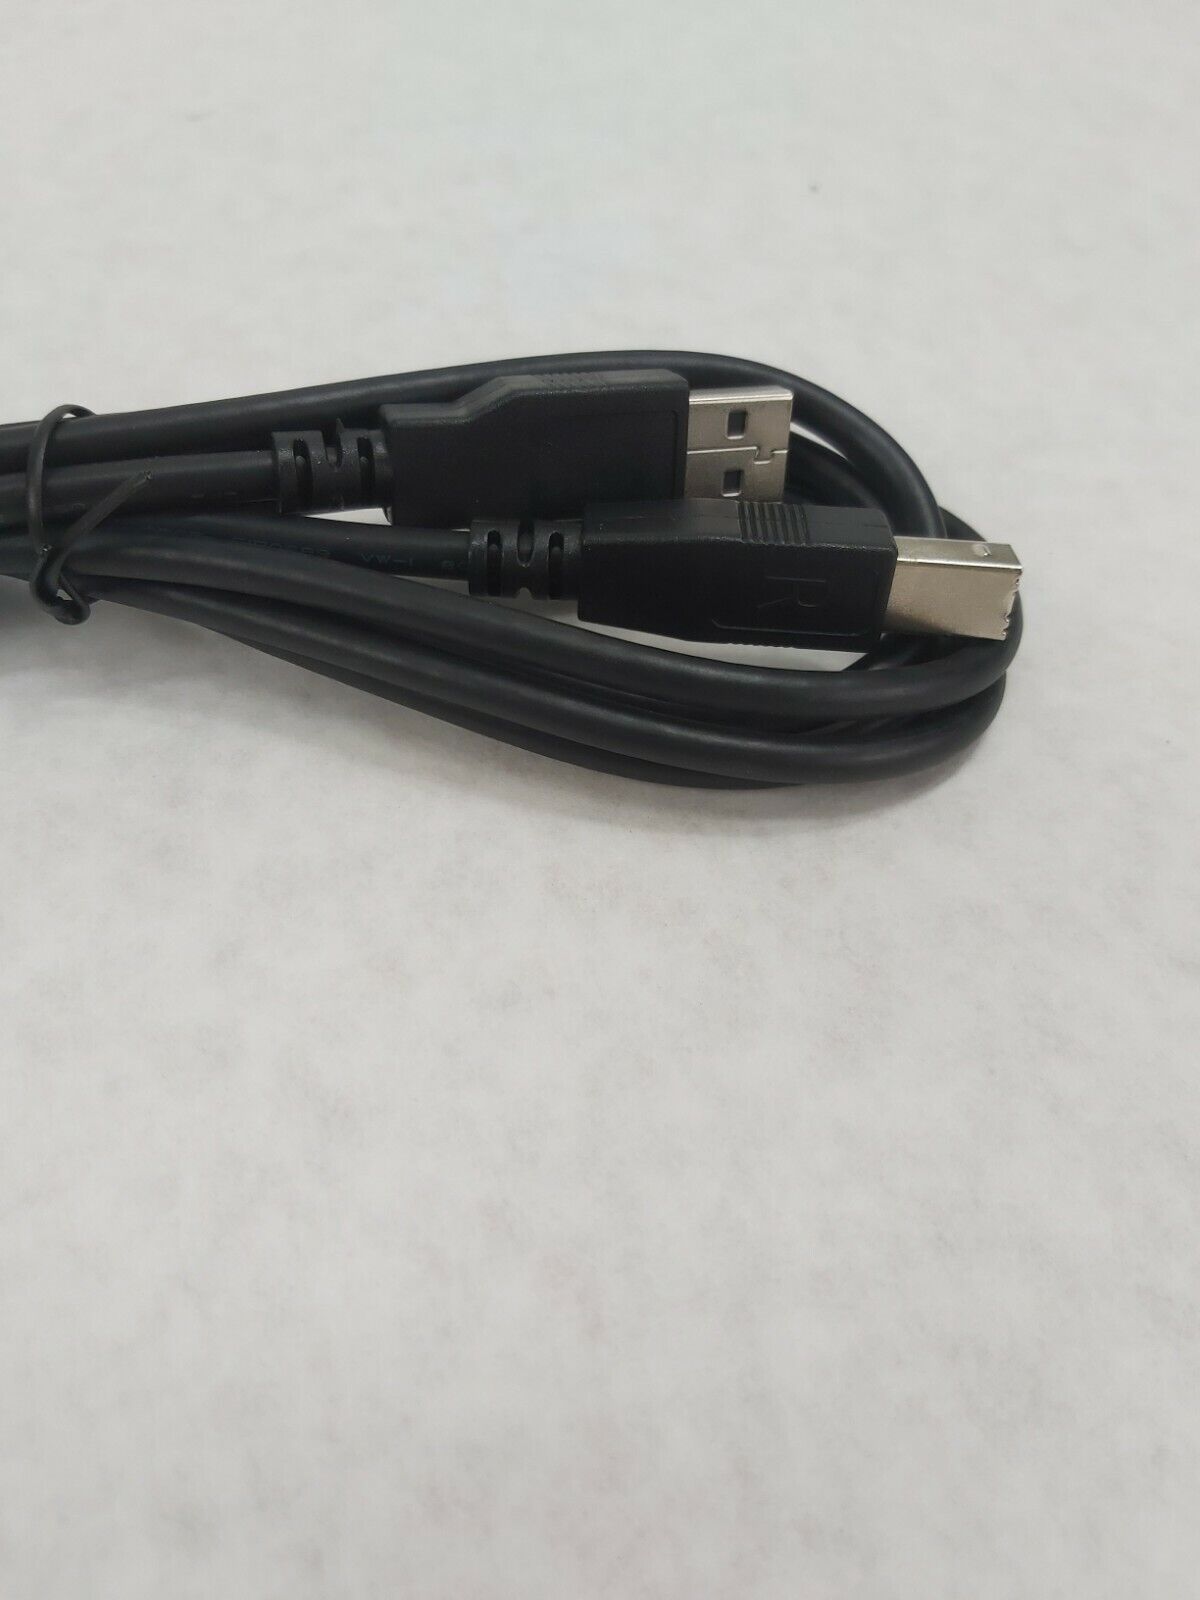 6 Foot High-Speed USB 2.0 USB  Scanner Printer Cord Cables Lot of 5